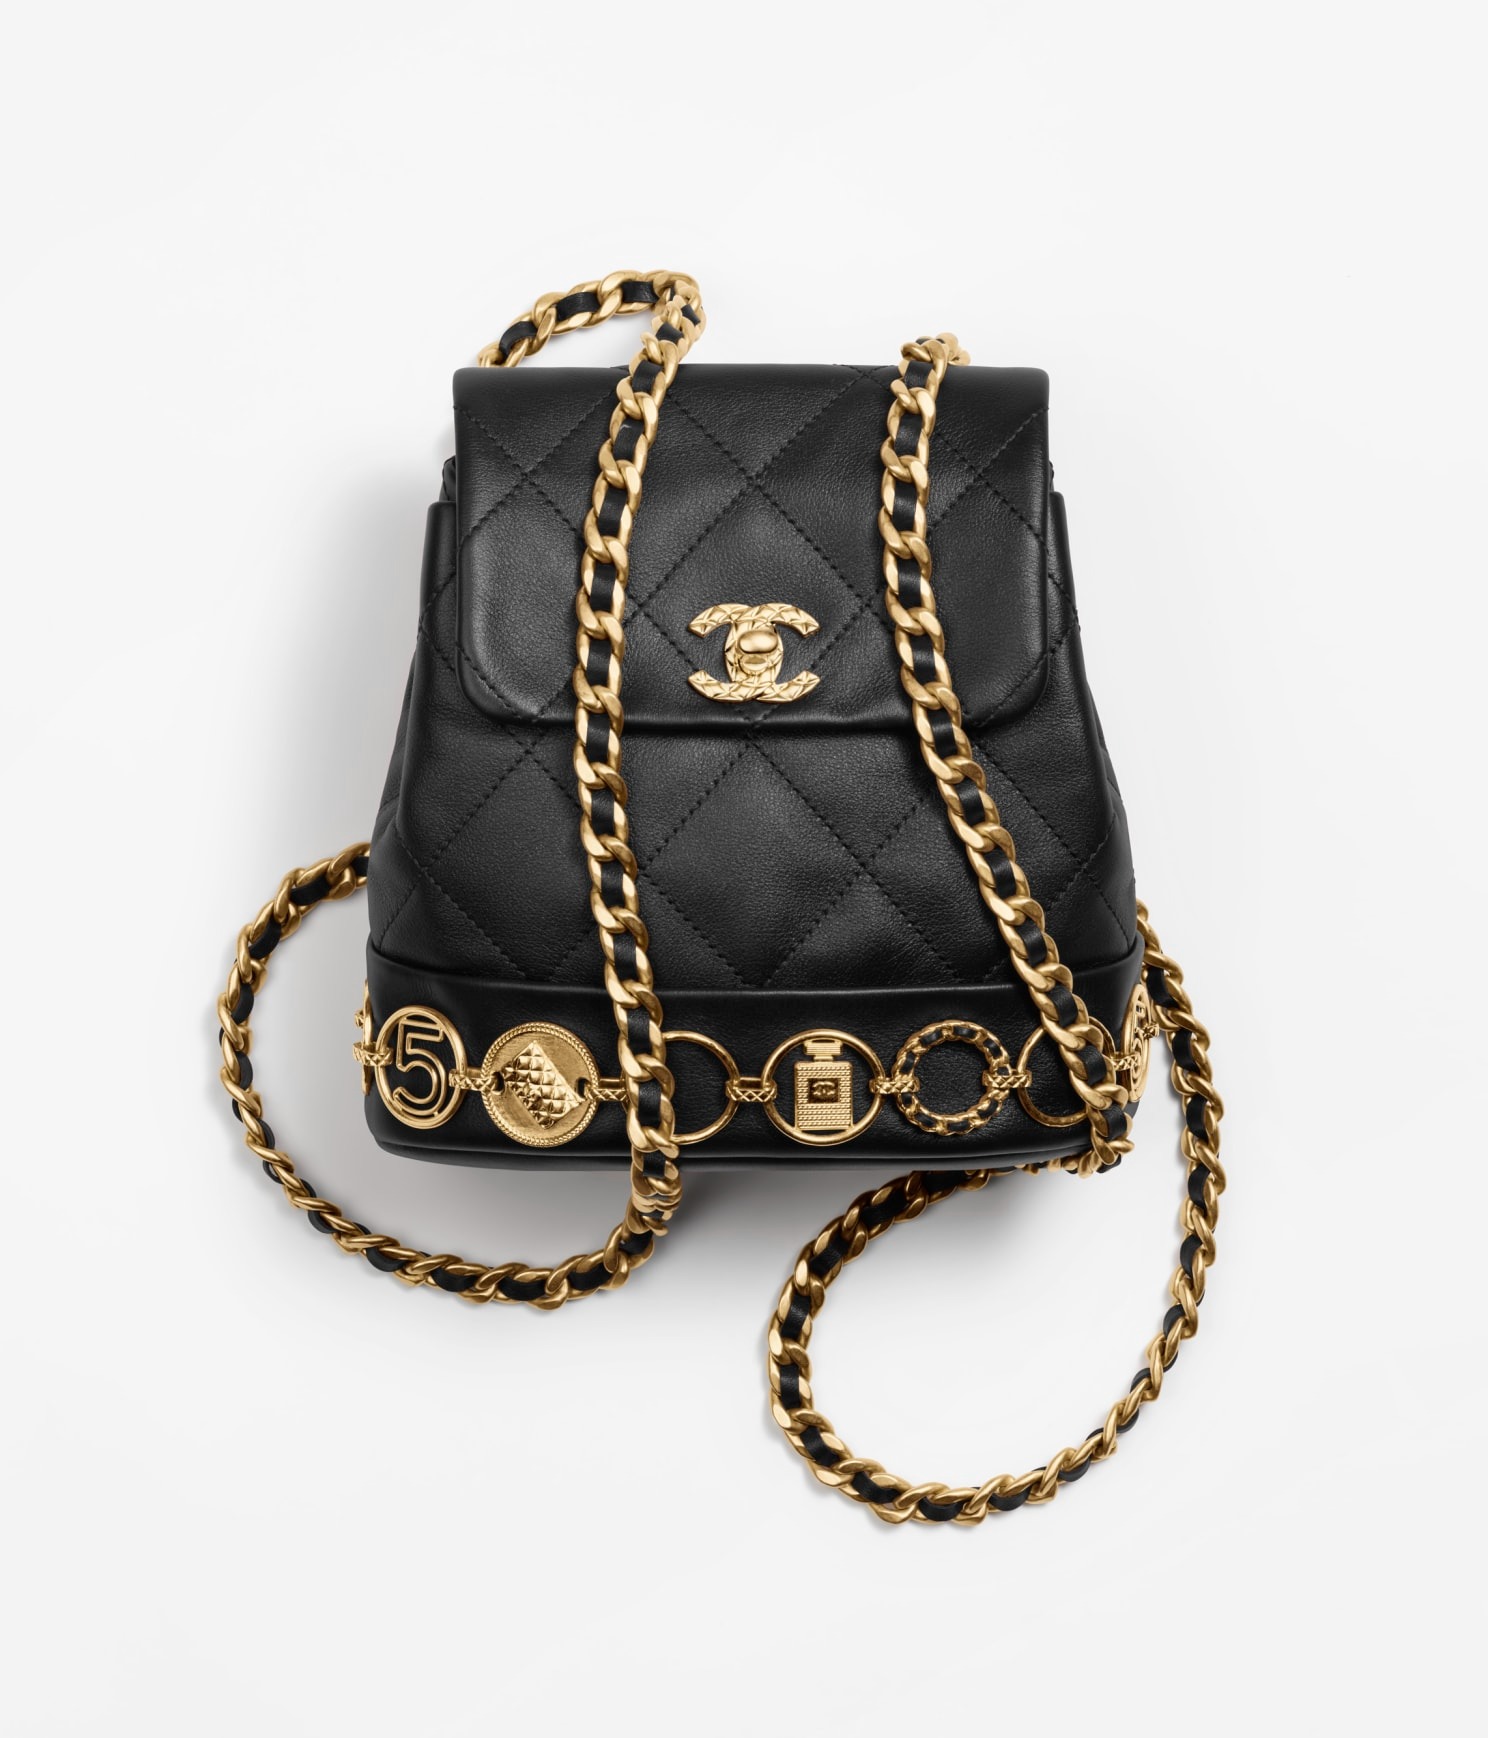 Classic Chanel Handbags To Invest In In 2021—From the 2.55 to the Boy Bag